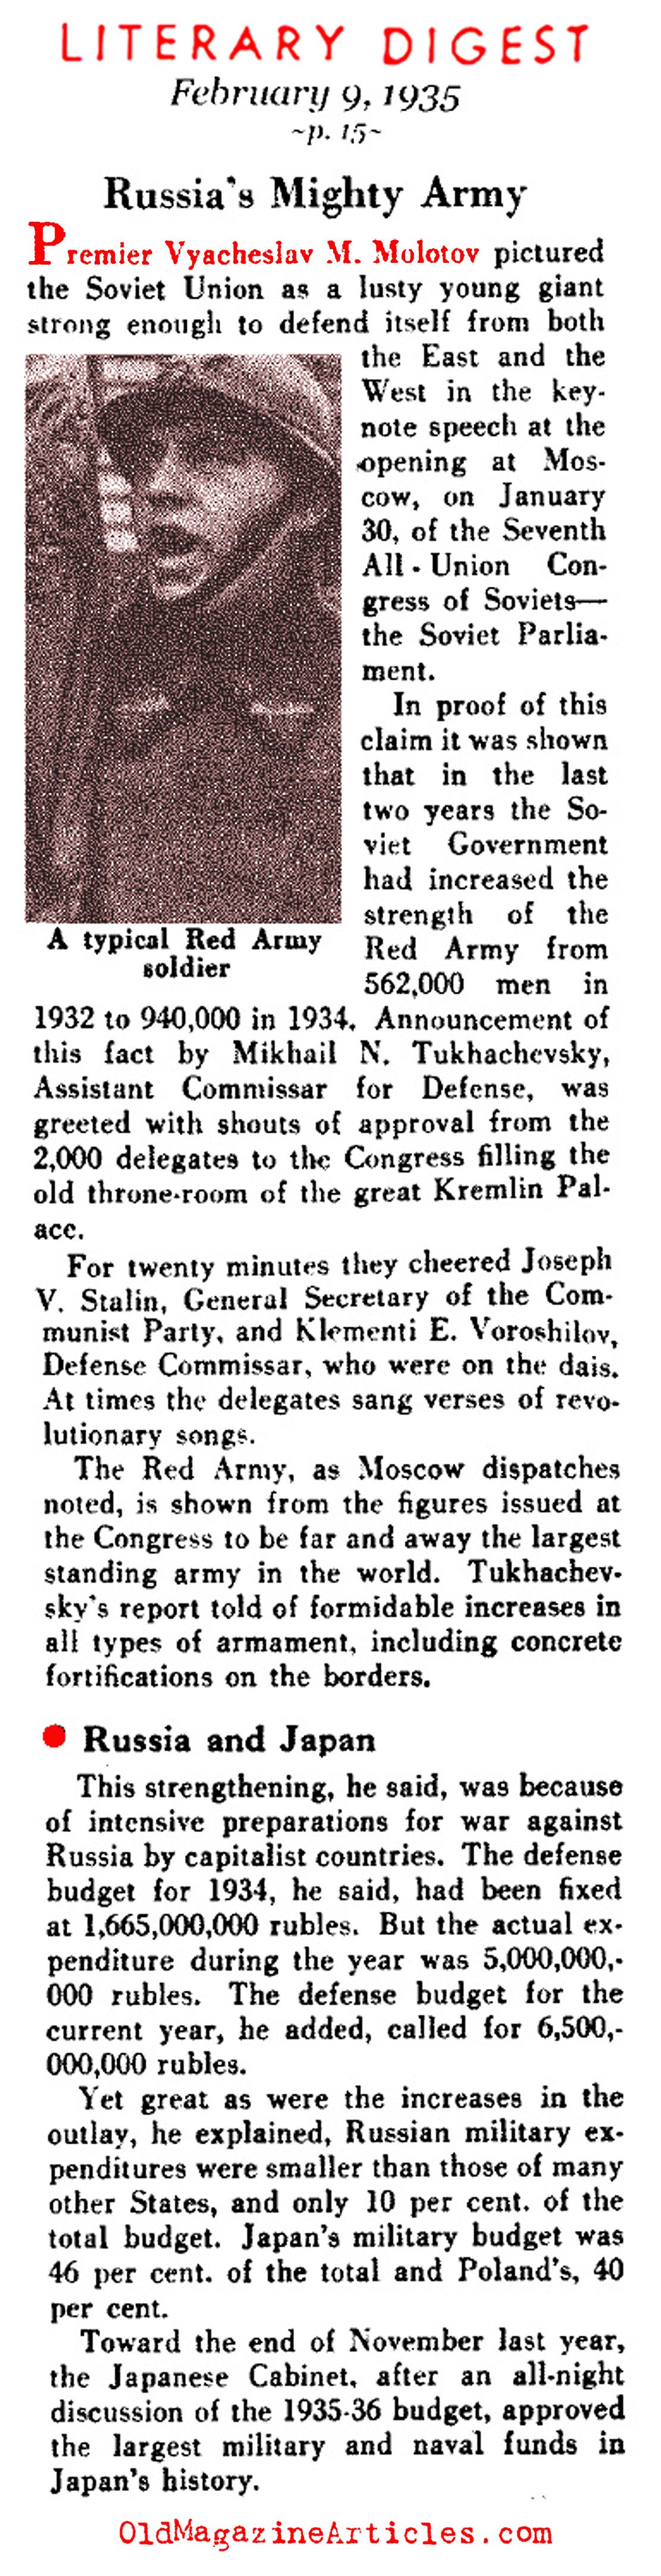 Military Buildup in the USSR (Literary Digest, 1935)